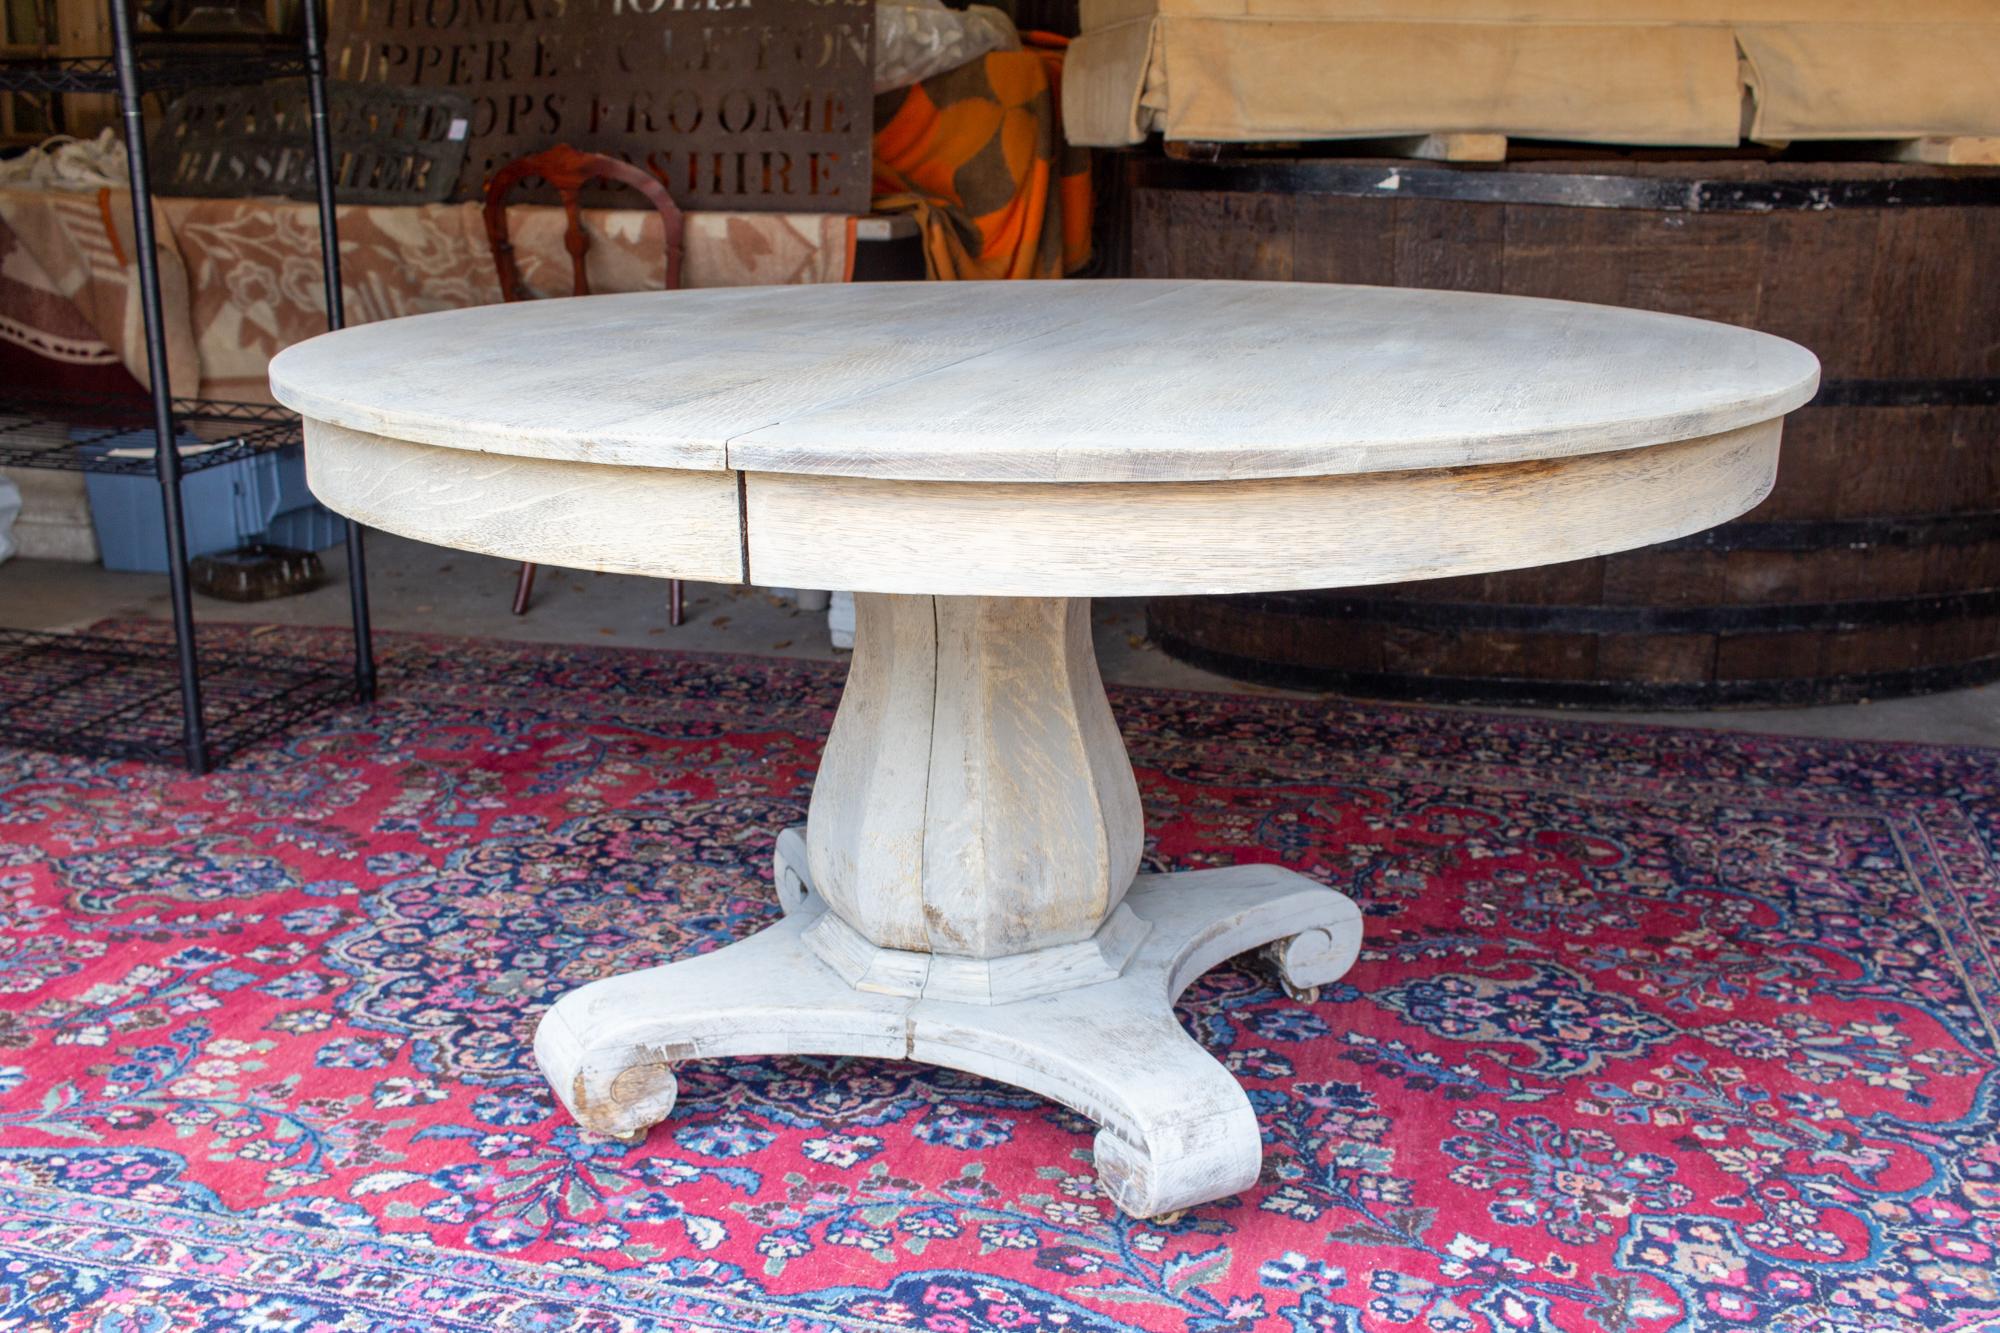 This antique round oak pedestal table has been refinished with a light greige wash and features four 10